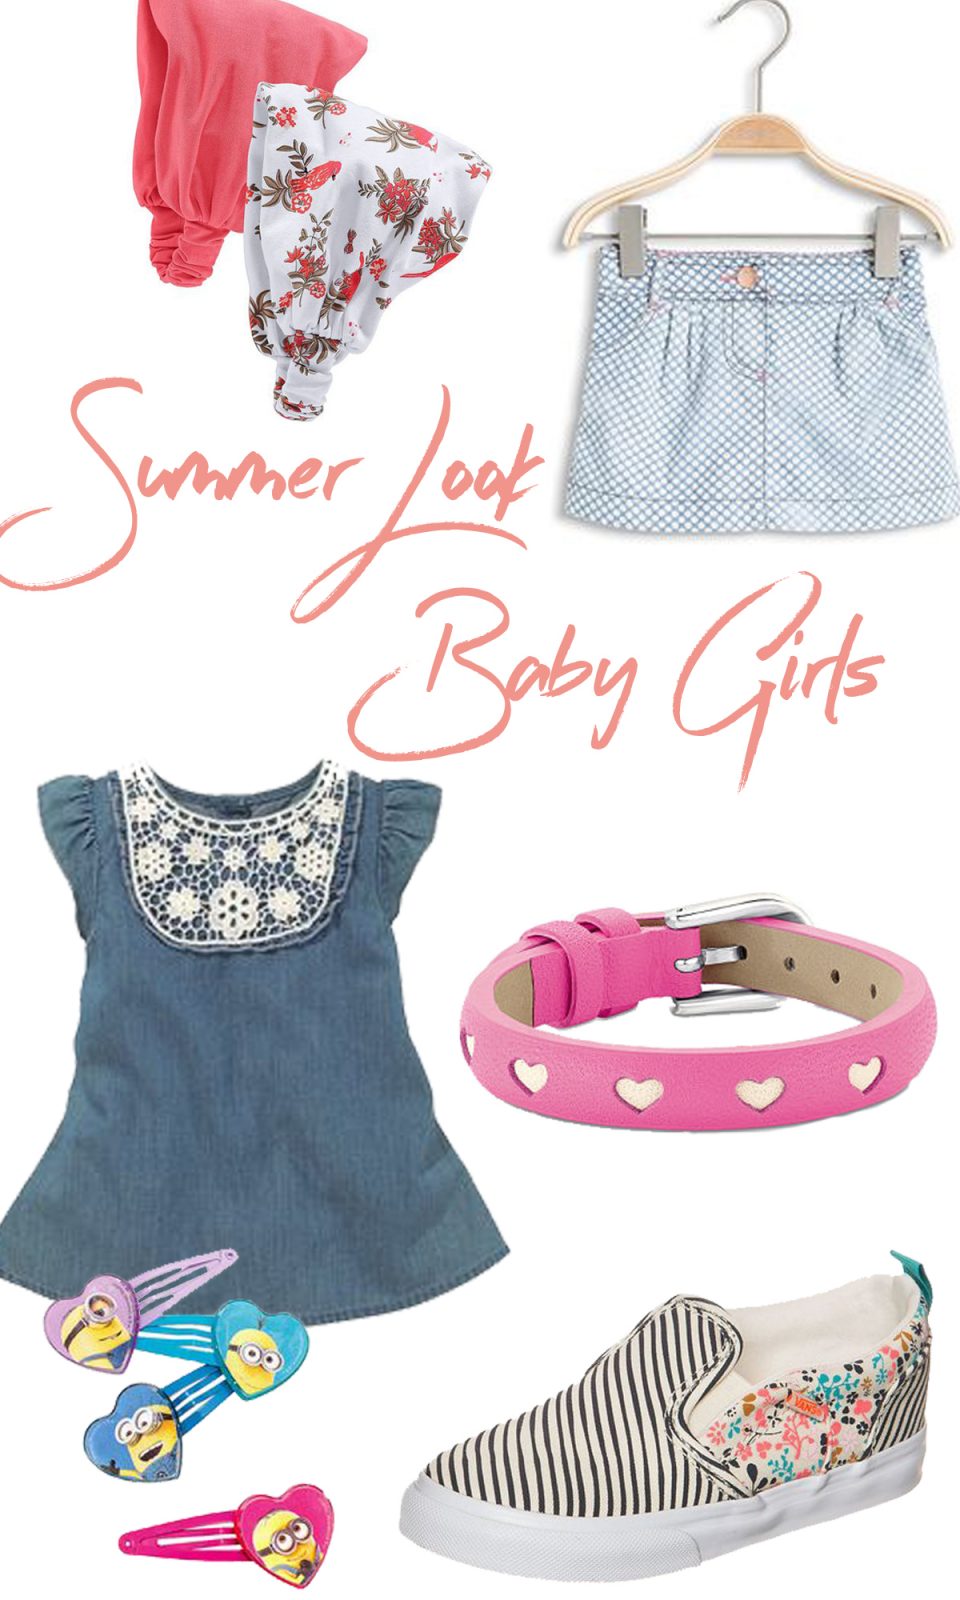 Otto Sommer Outfits Summer Look Baby Girls